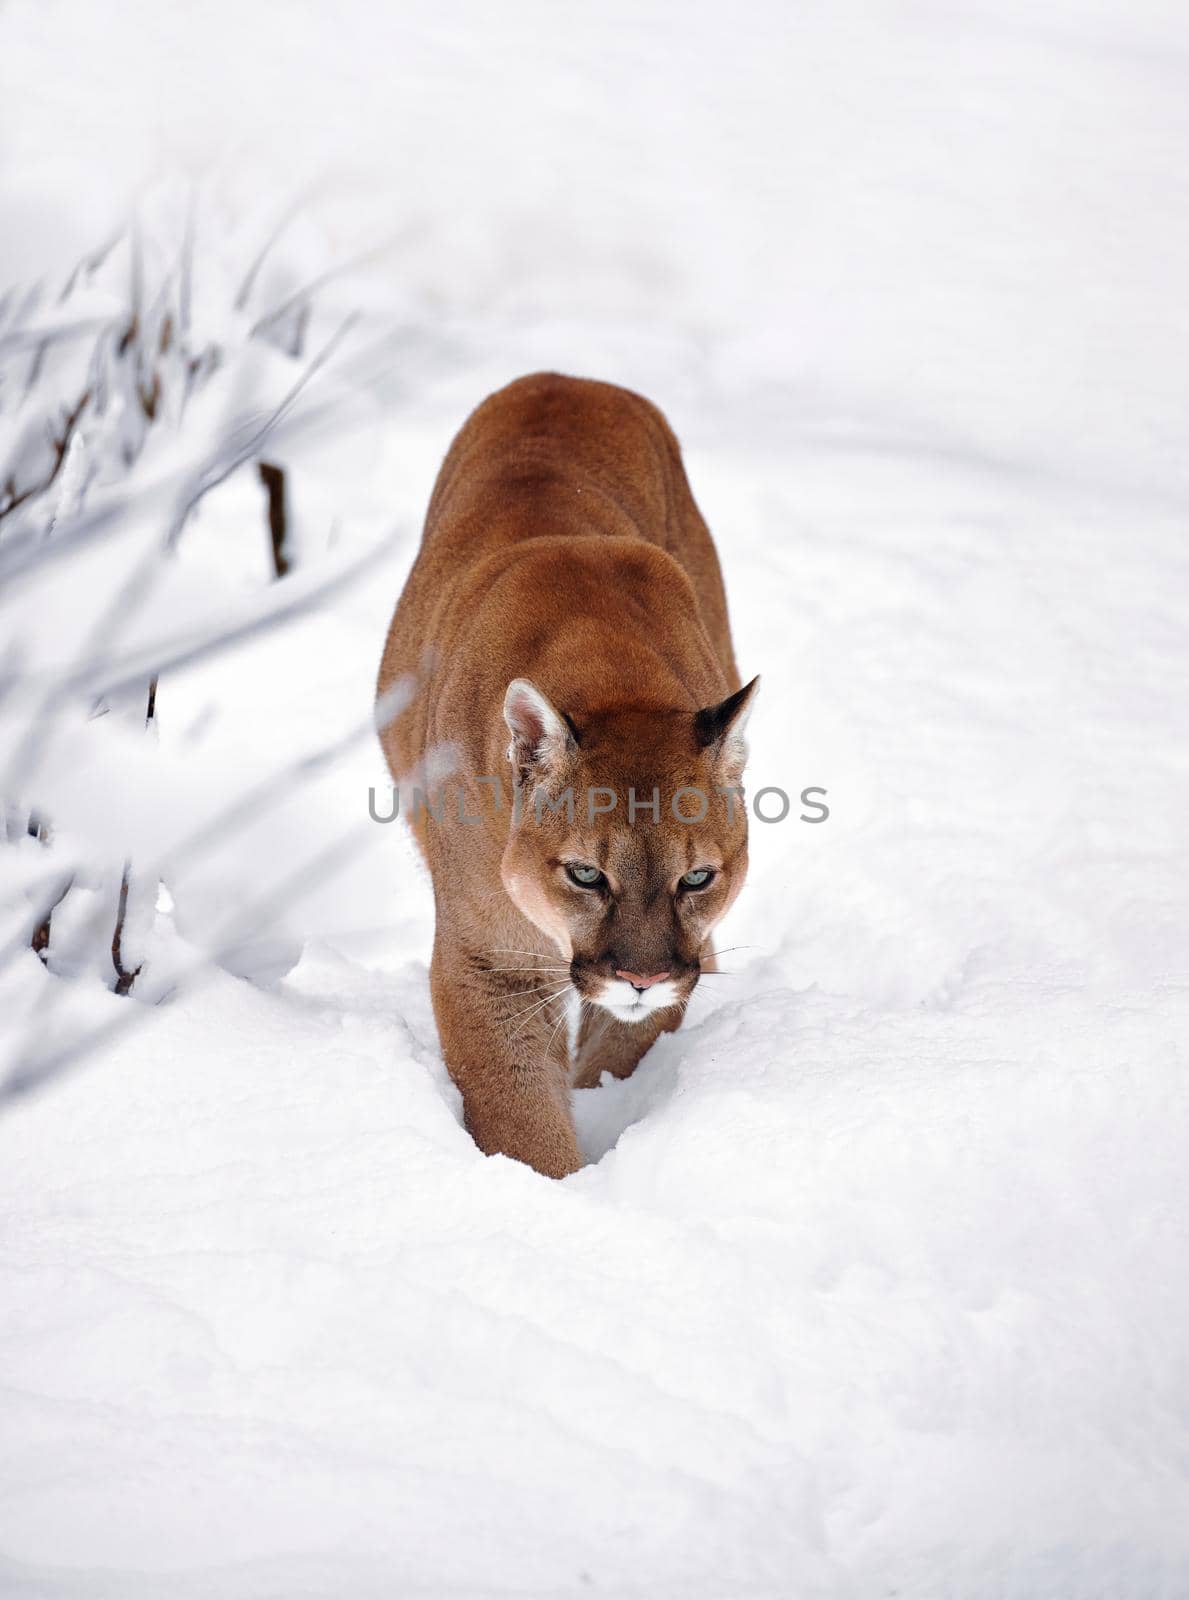 Puma in the winter woods, Mountain Lion look. Mountain lion hunts in a snowy forest. Wild cat on snow. Eyes of a predator stalking prey. Portrait of a big cat by EvgeniyQW